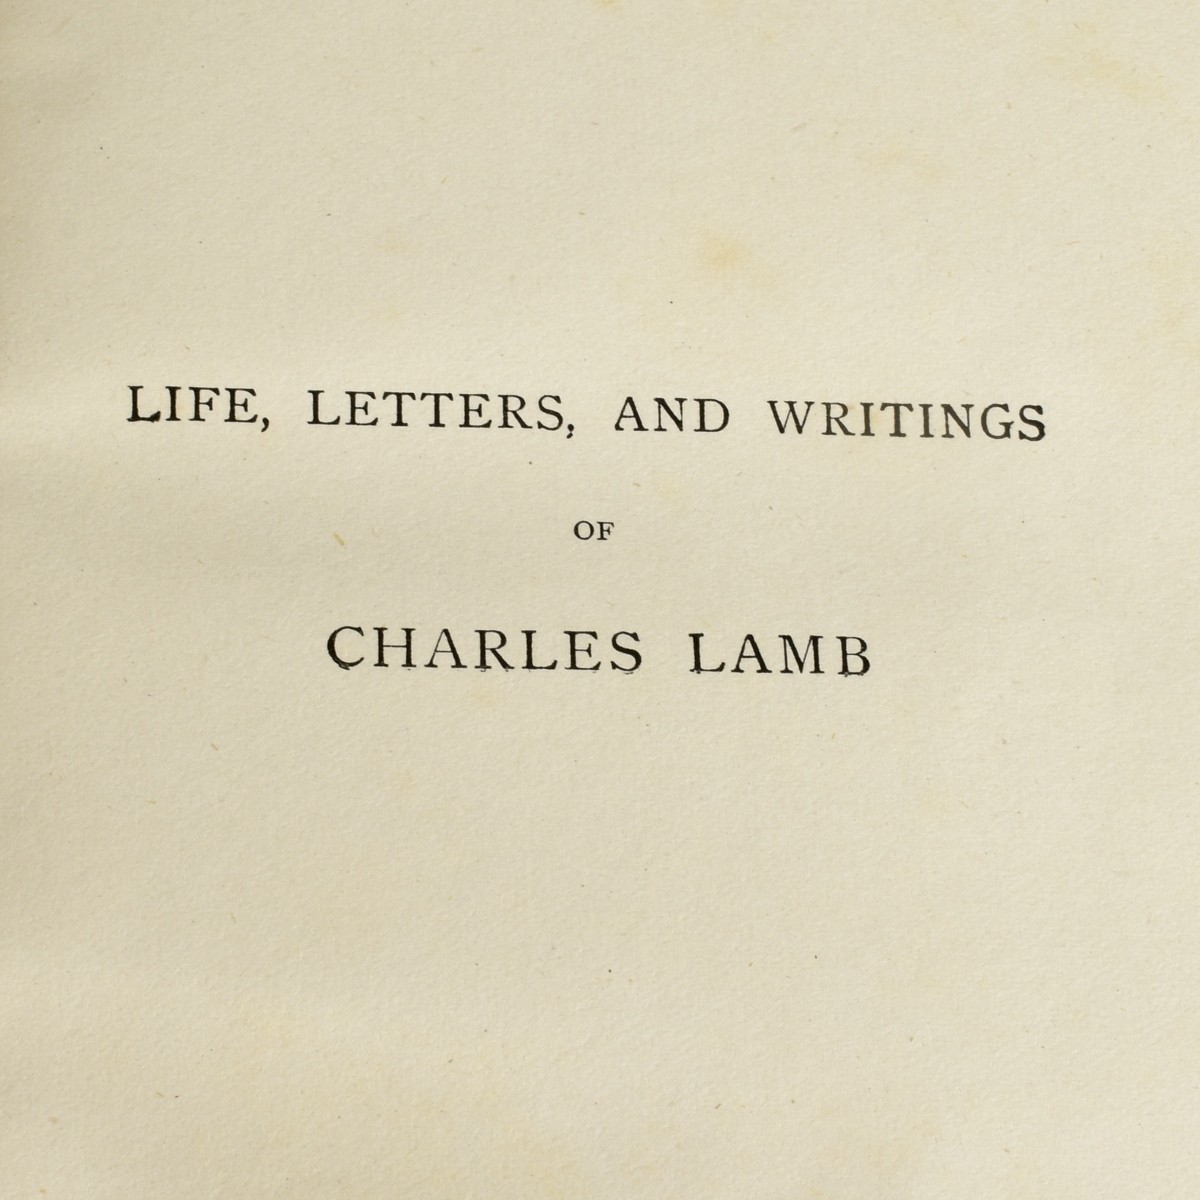 George Eliot and Charles Lamb Assorted Volumns